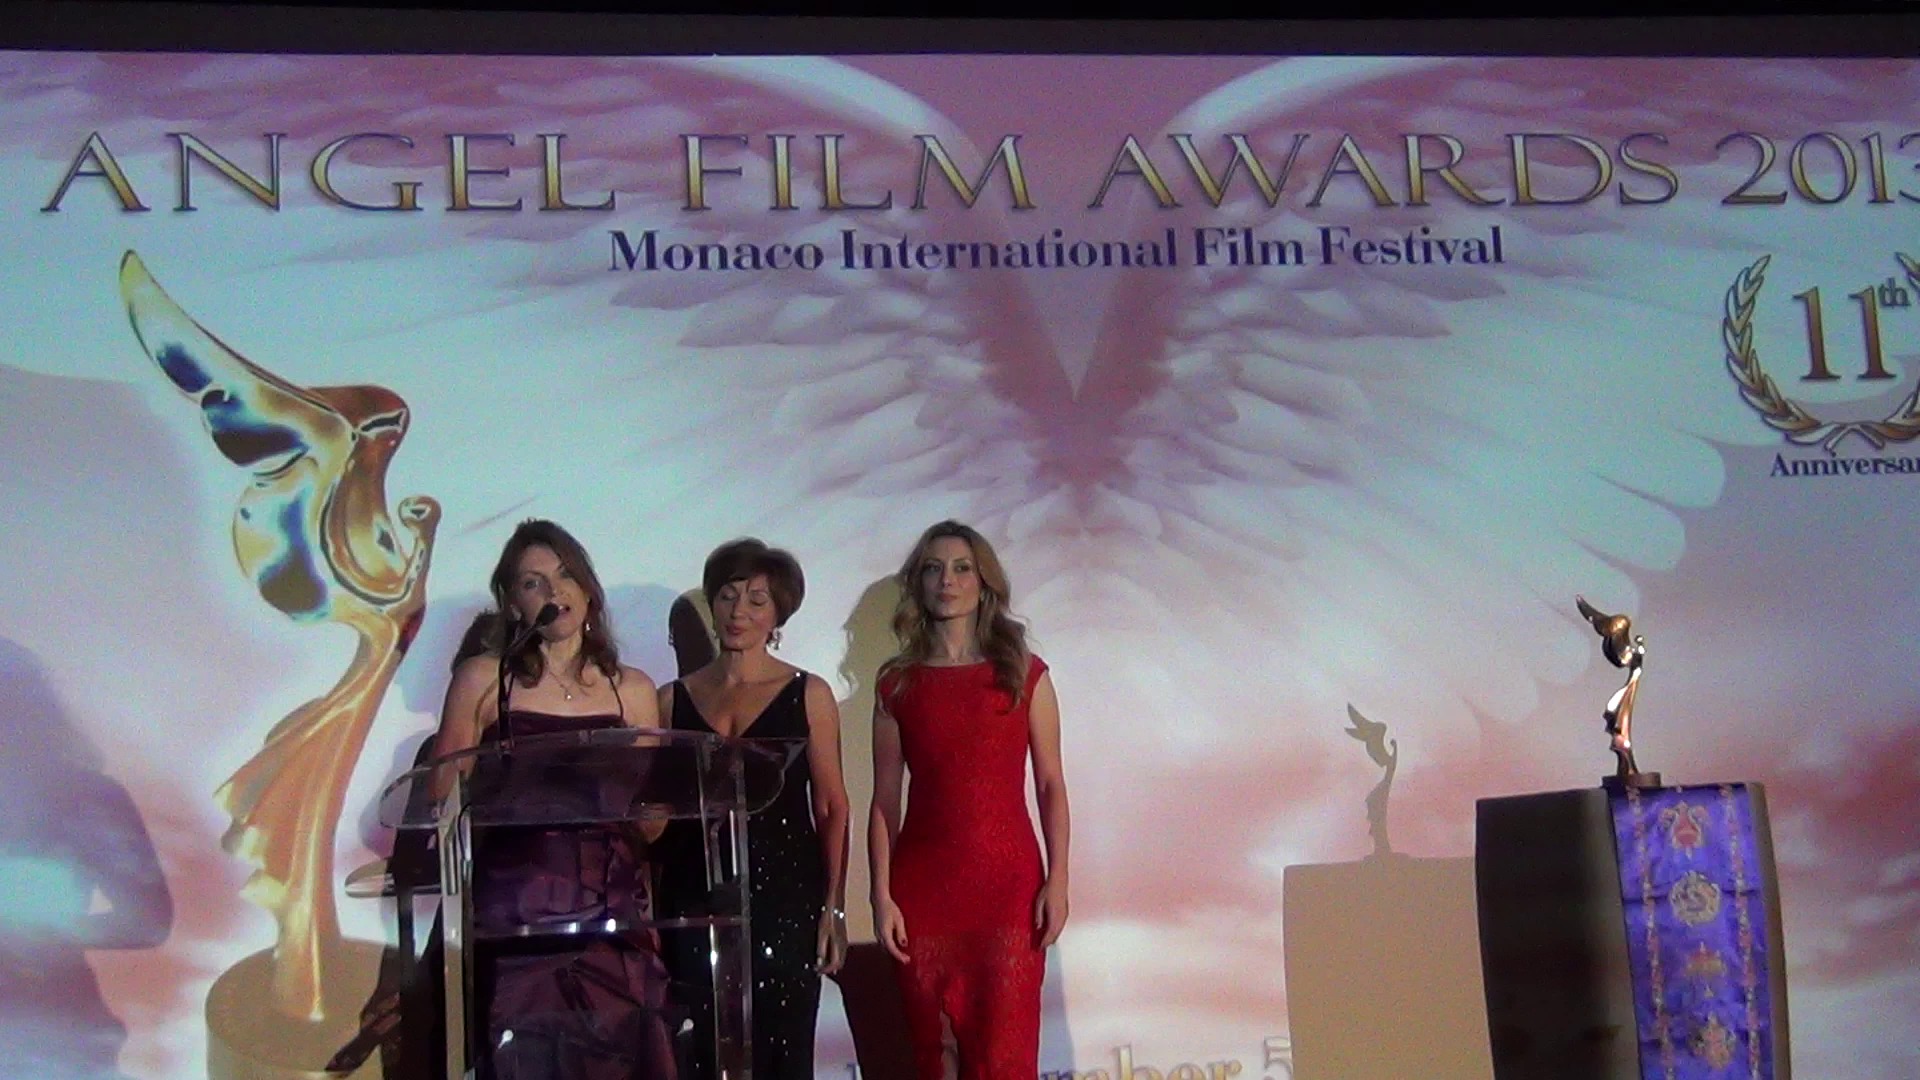 Film Director Jolanda Ellenberger (left) thanks the jury and audience for her BEST HUMANITARIAN SHORT FILM ANGELS AWARD at the Monte Carlo award ceremony on December 7, 2013. Film Producer Daniella Gonella (middle) & Actress Antonella Savucci (right)